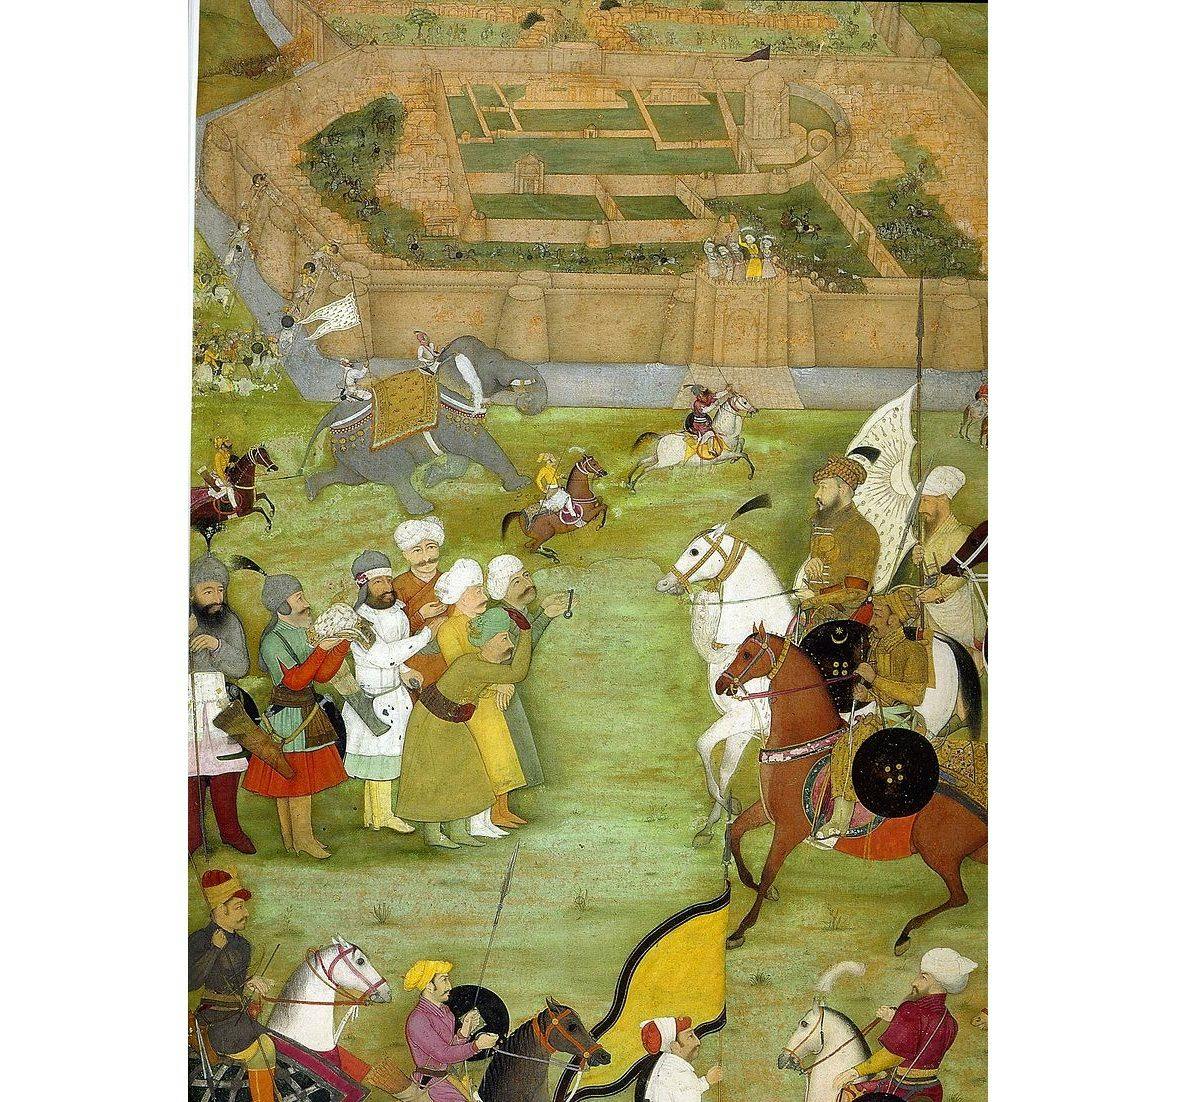 Folio from Padshahnama depicting the surrender of the Safavid Persian garrison of Kandahar in 1638 to the Mughal army